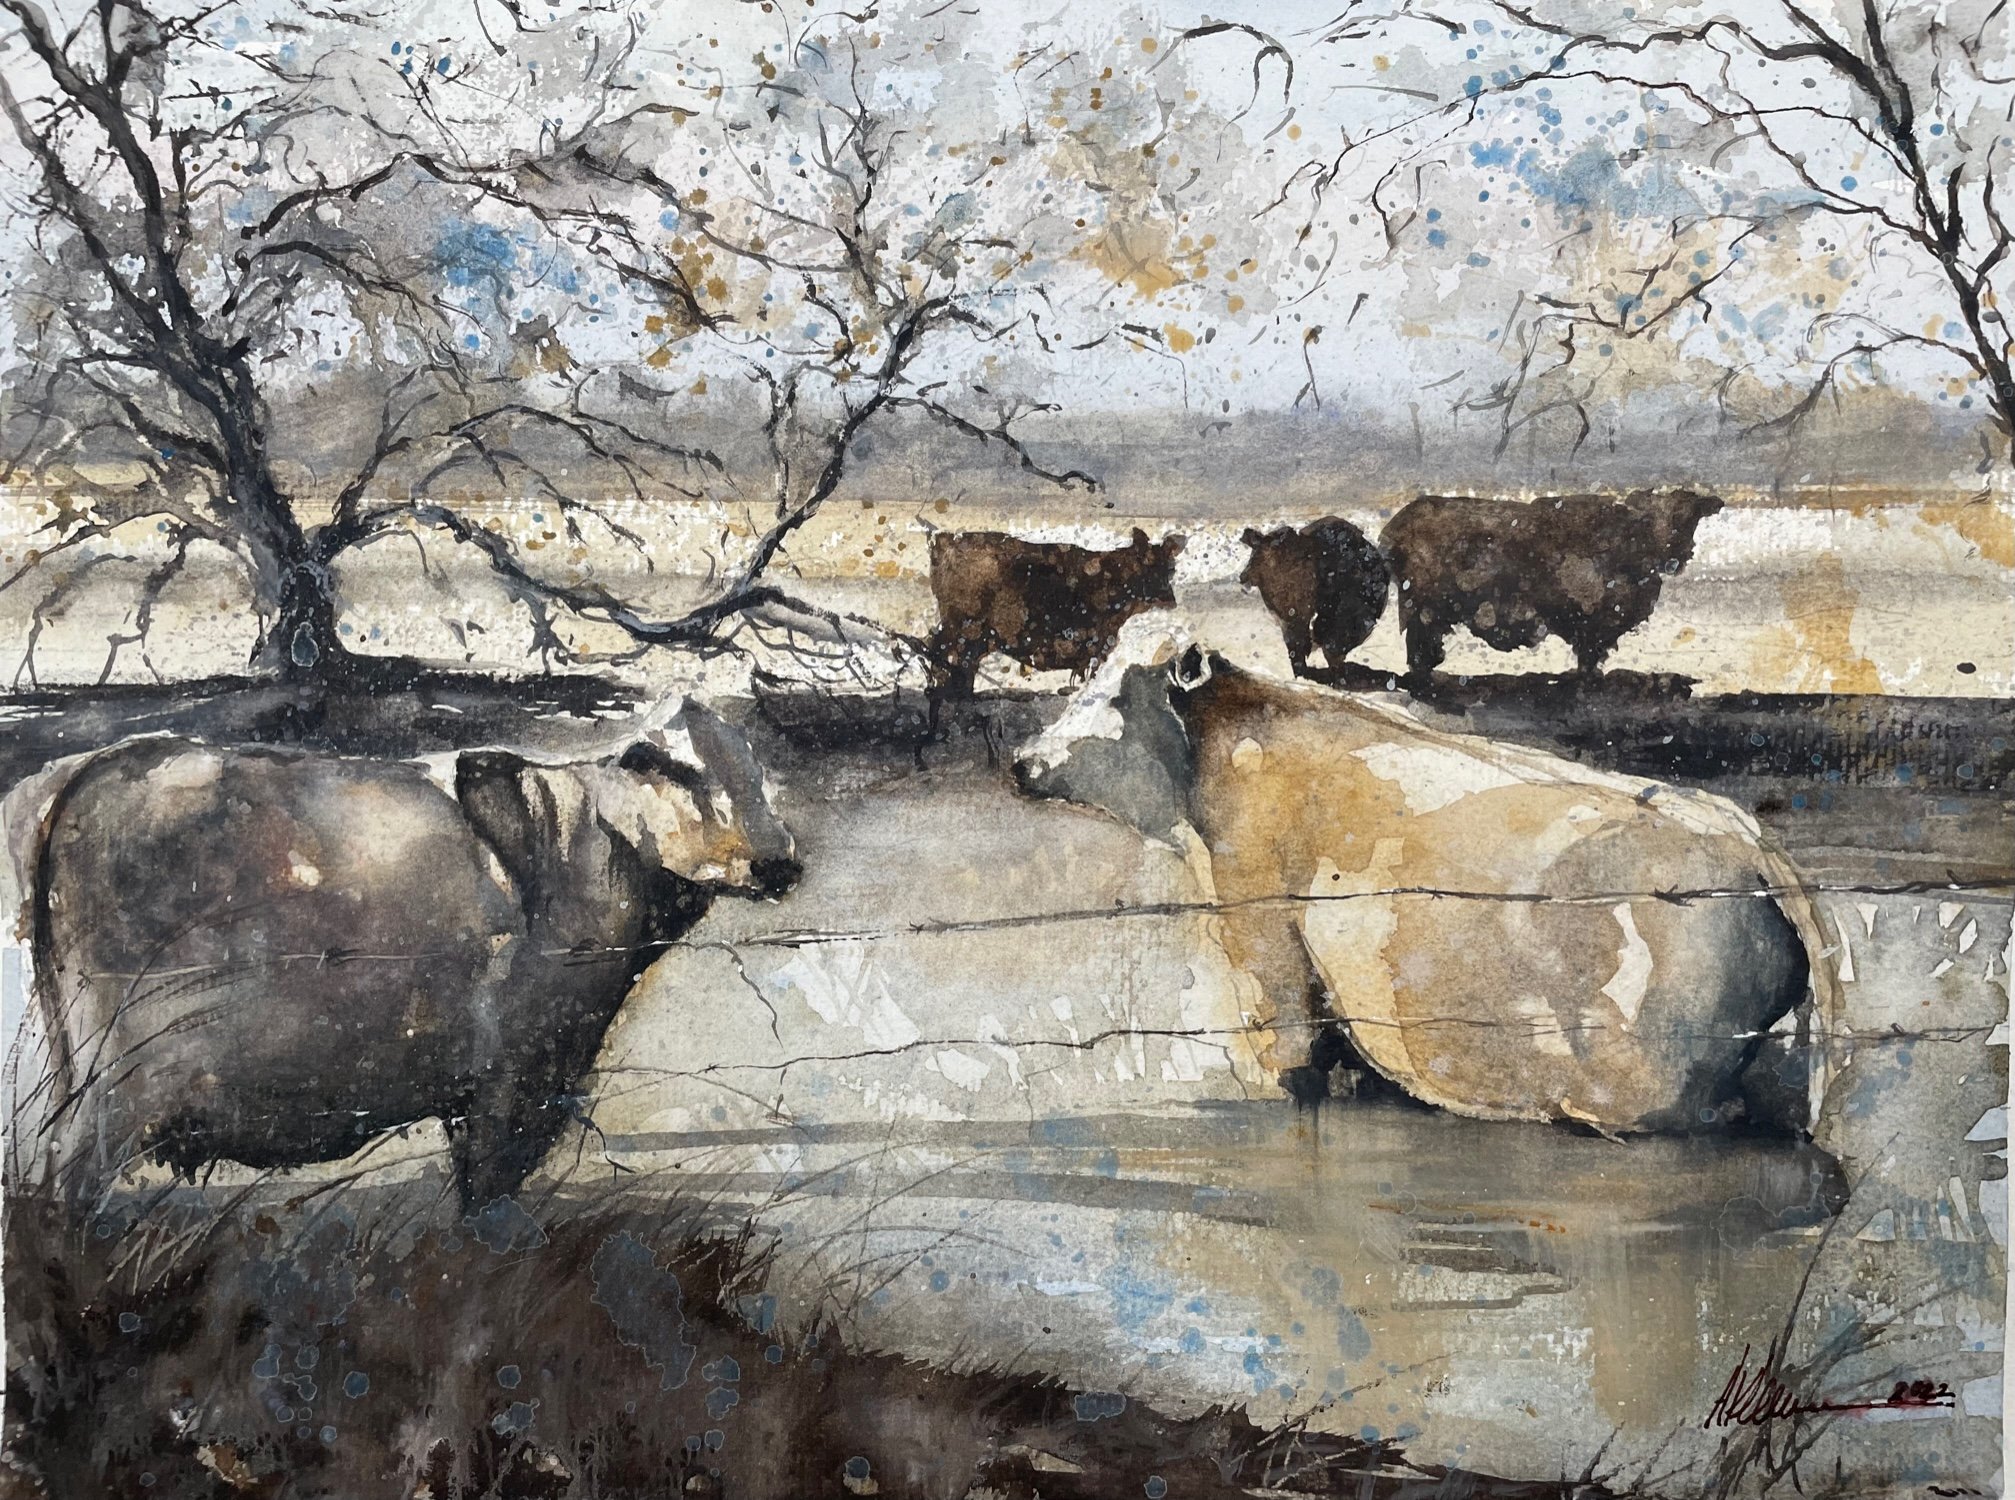 Cattle Series - Cool down in the pond.jpg